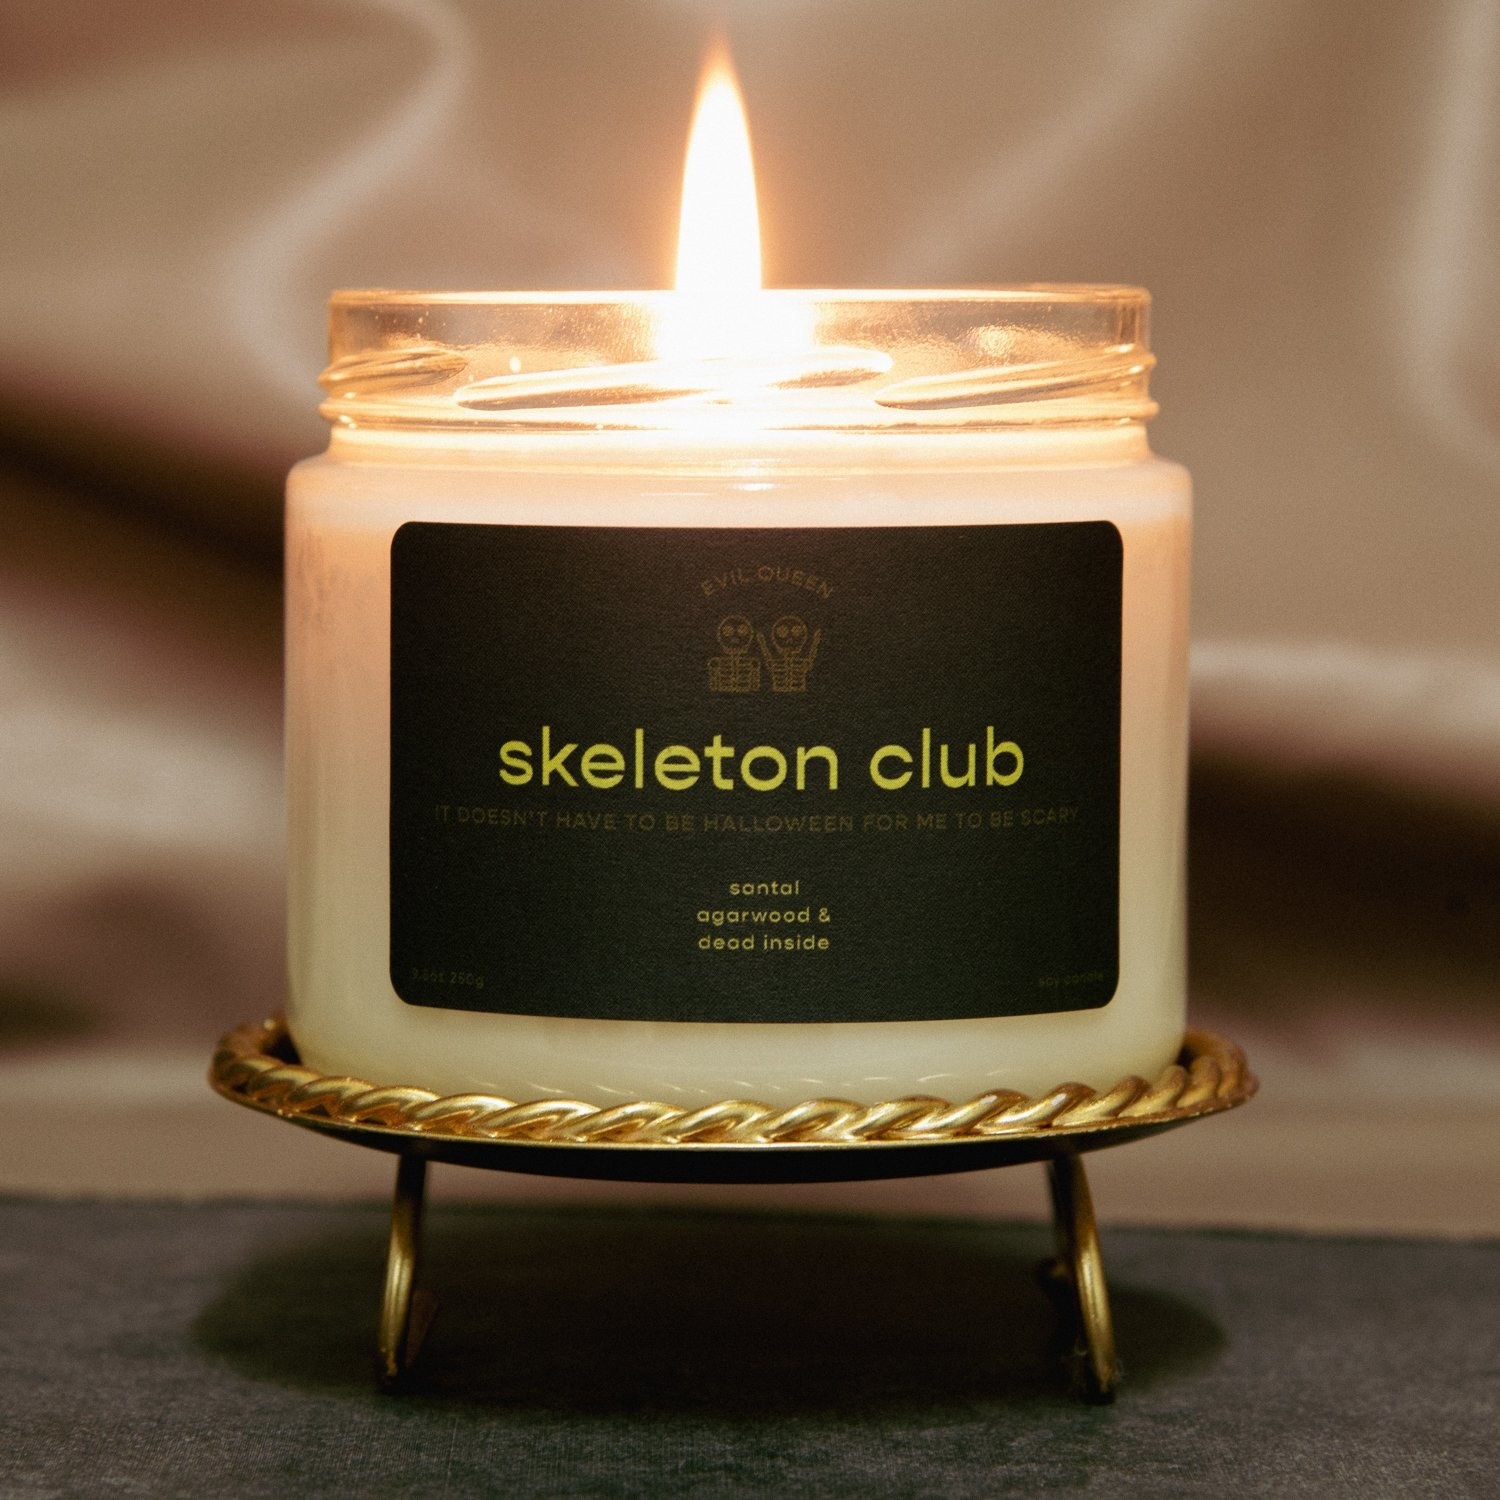 a candle with a black label that says &quot;skeleton club&quot; on it